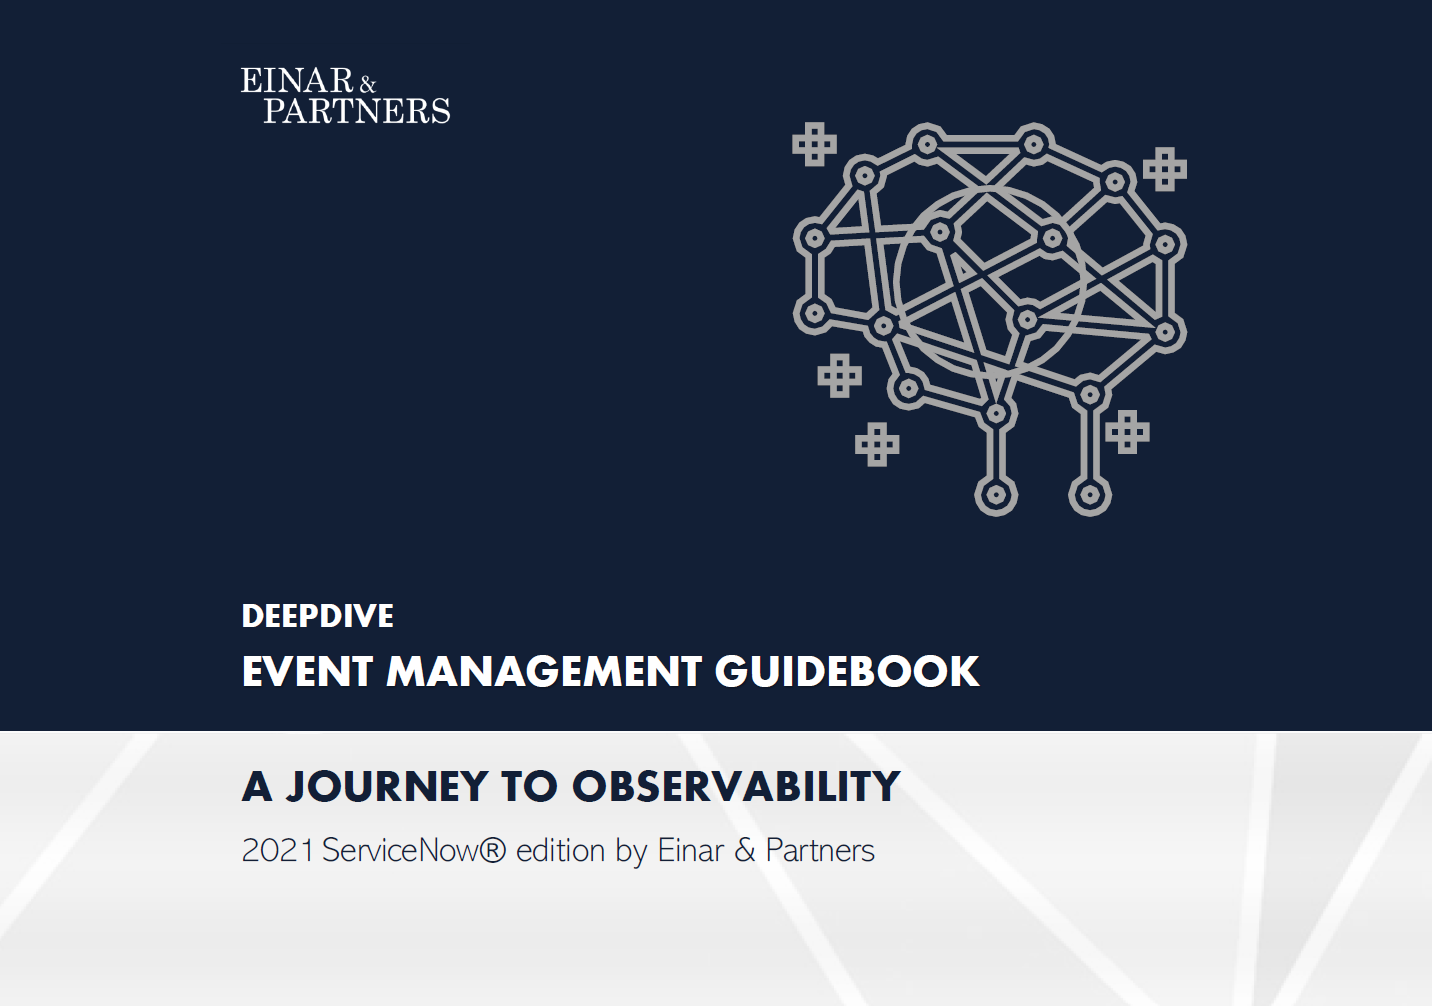 servicenow-event-management-guidebook